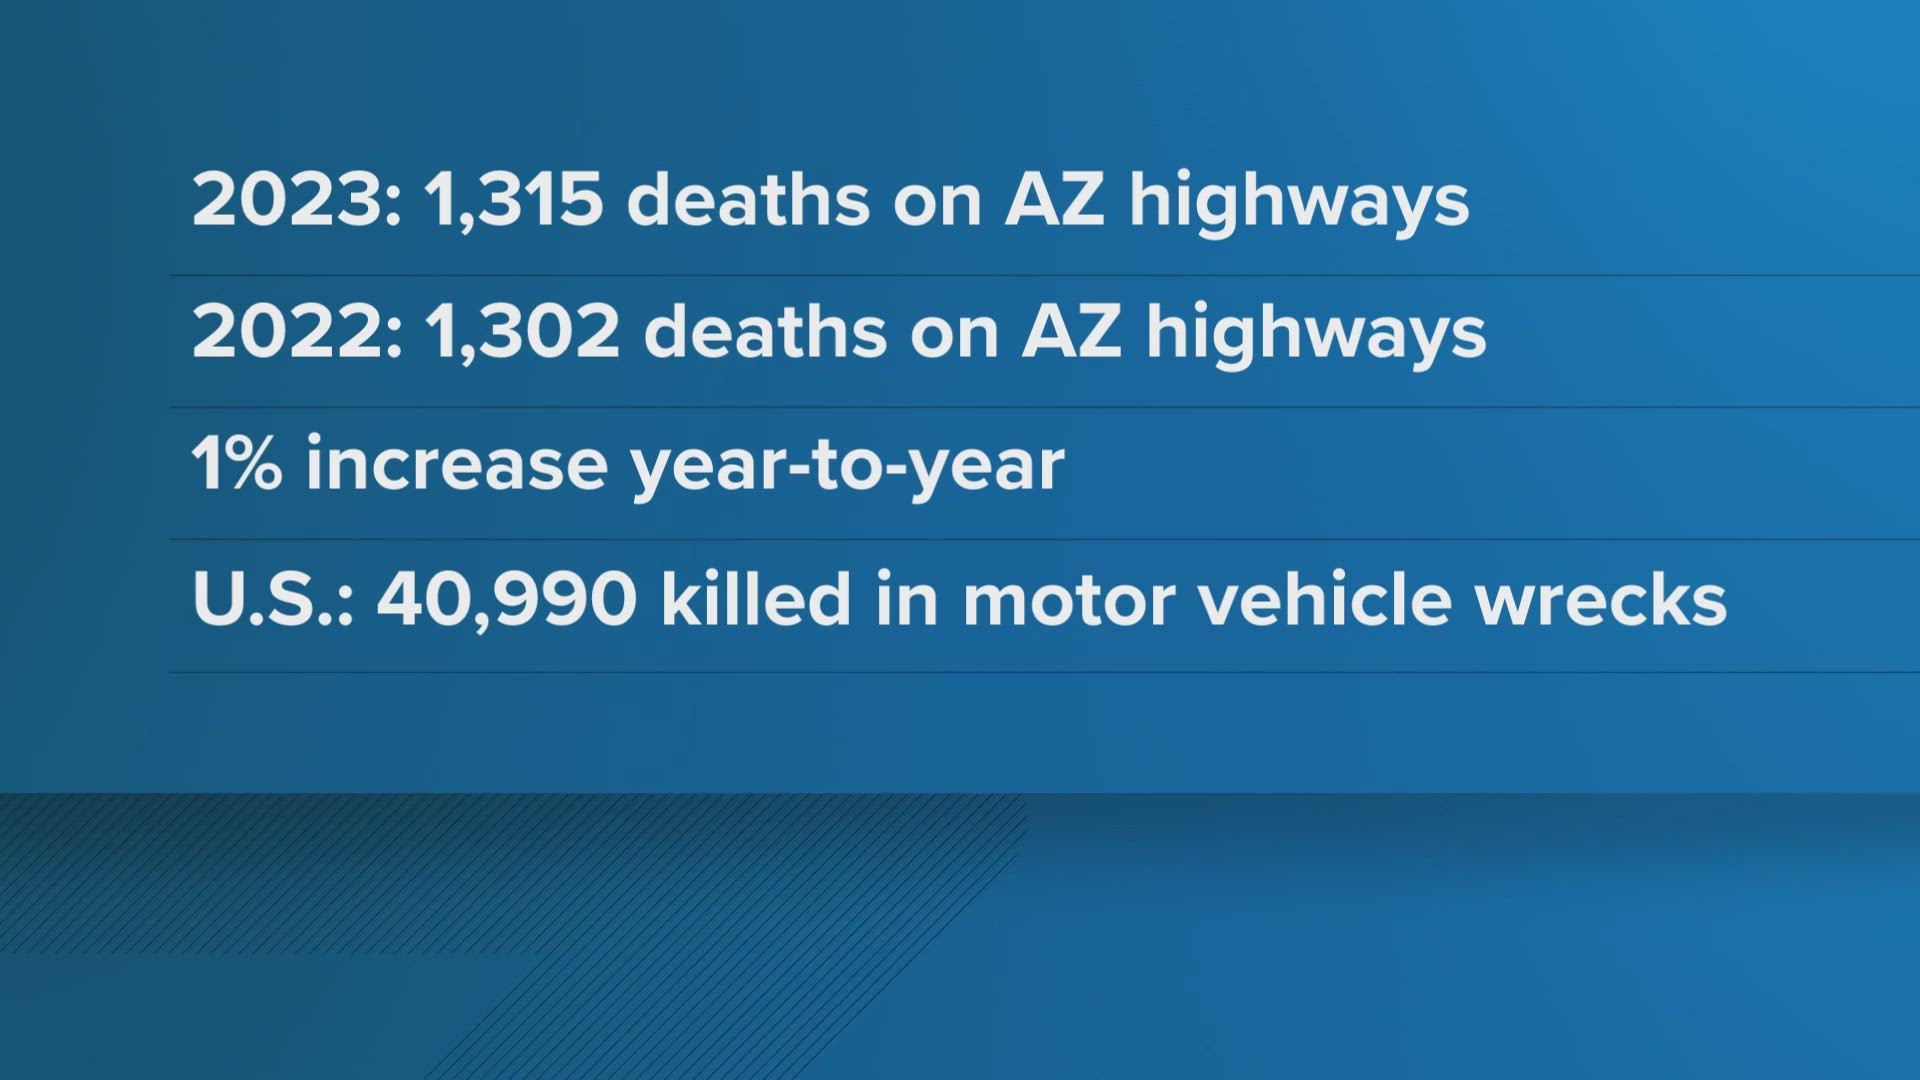 According to an NHTSA report showing early estimates of motor vehicle traffic fatalities in 2023, 1,315 people died on Arizona highways.